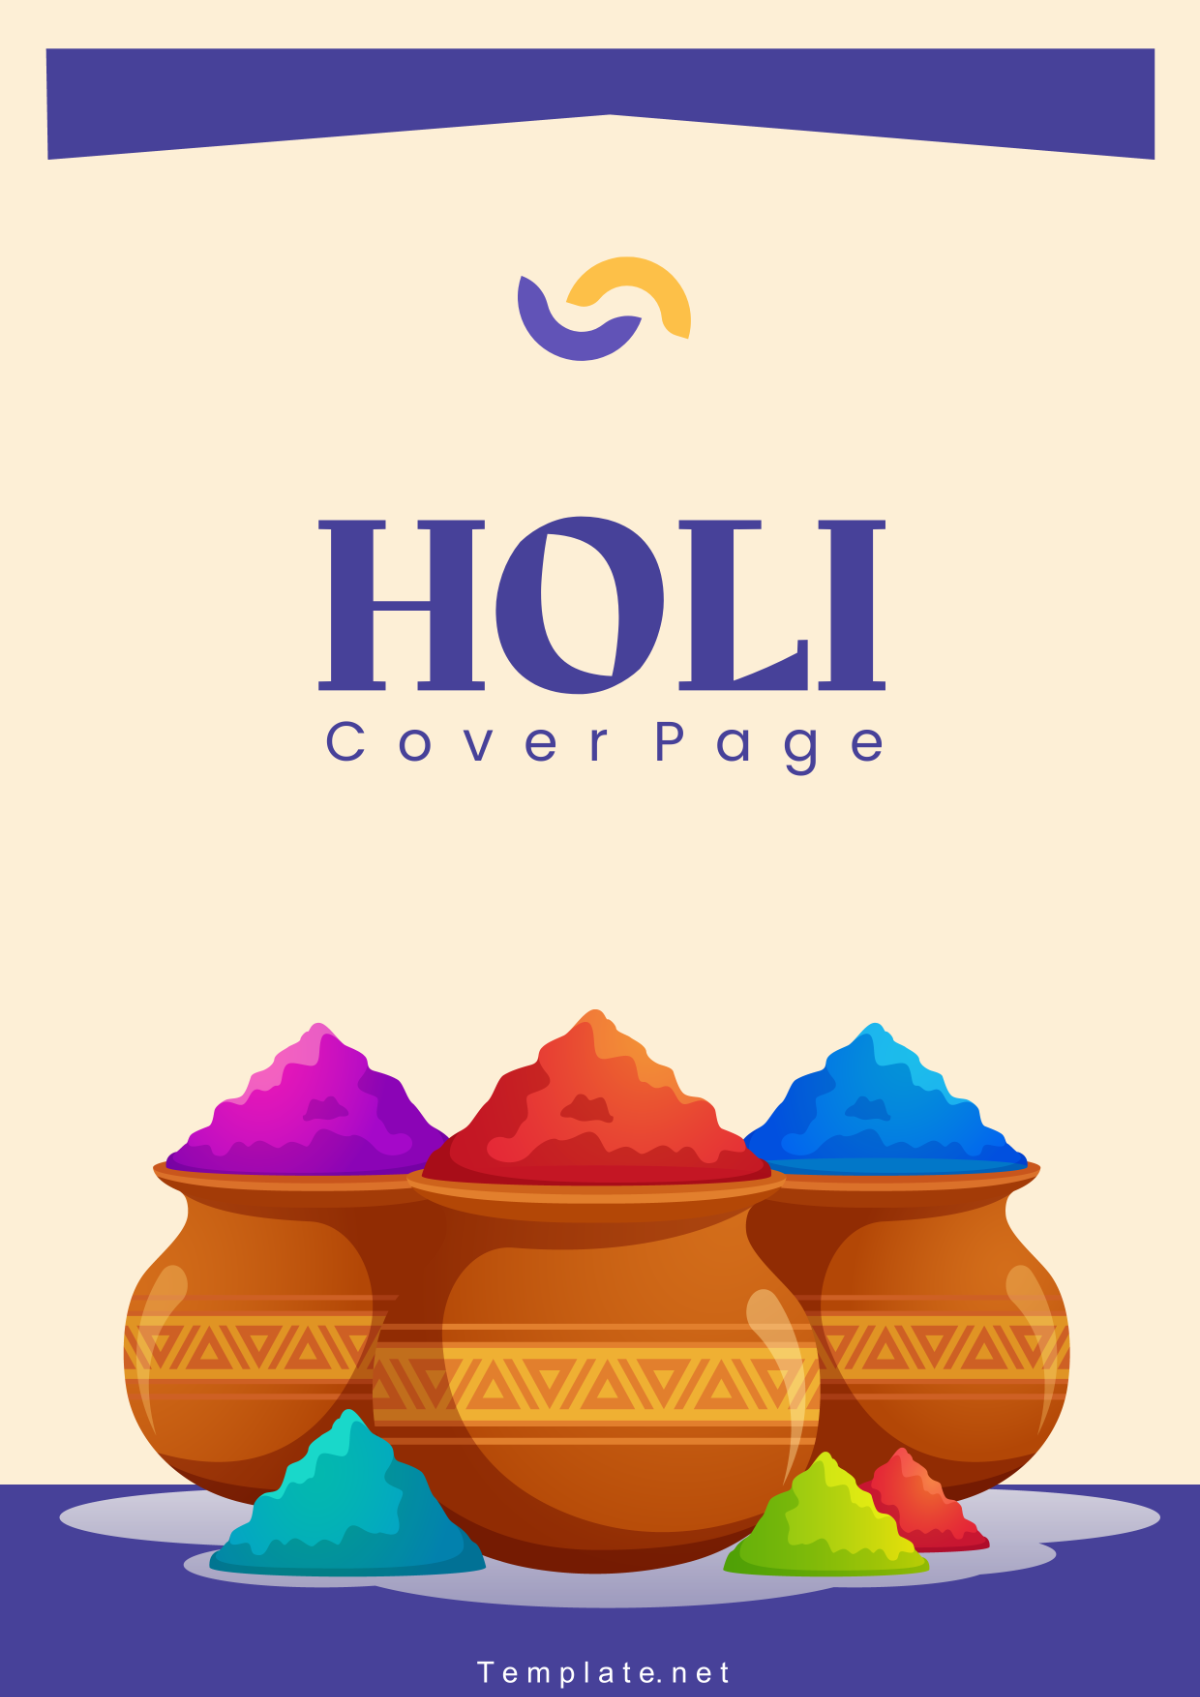 Holi Cover Page Template